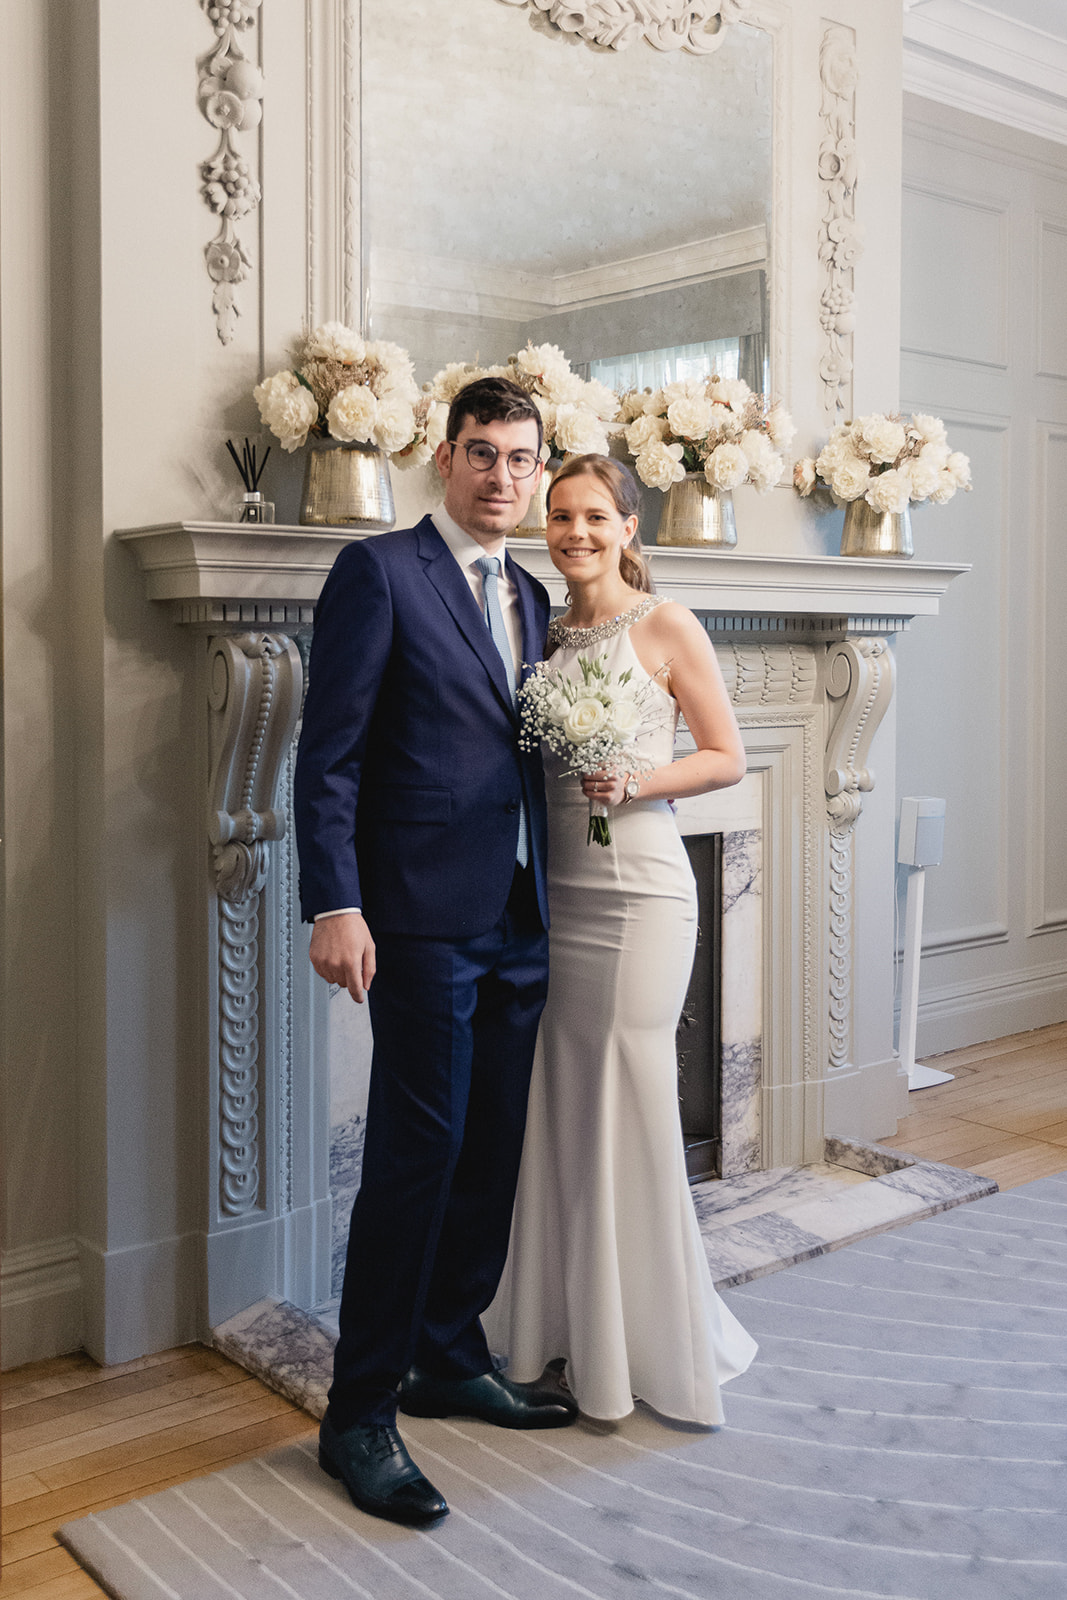 Kinga and Jean-Marc portrait in the Pimlico Room at The Old Marylebone Town Hall